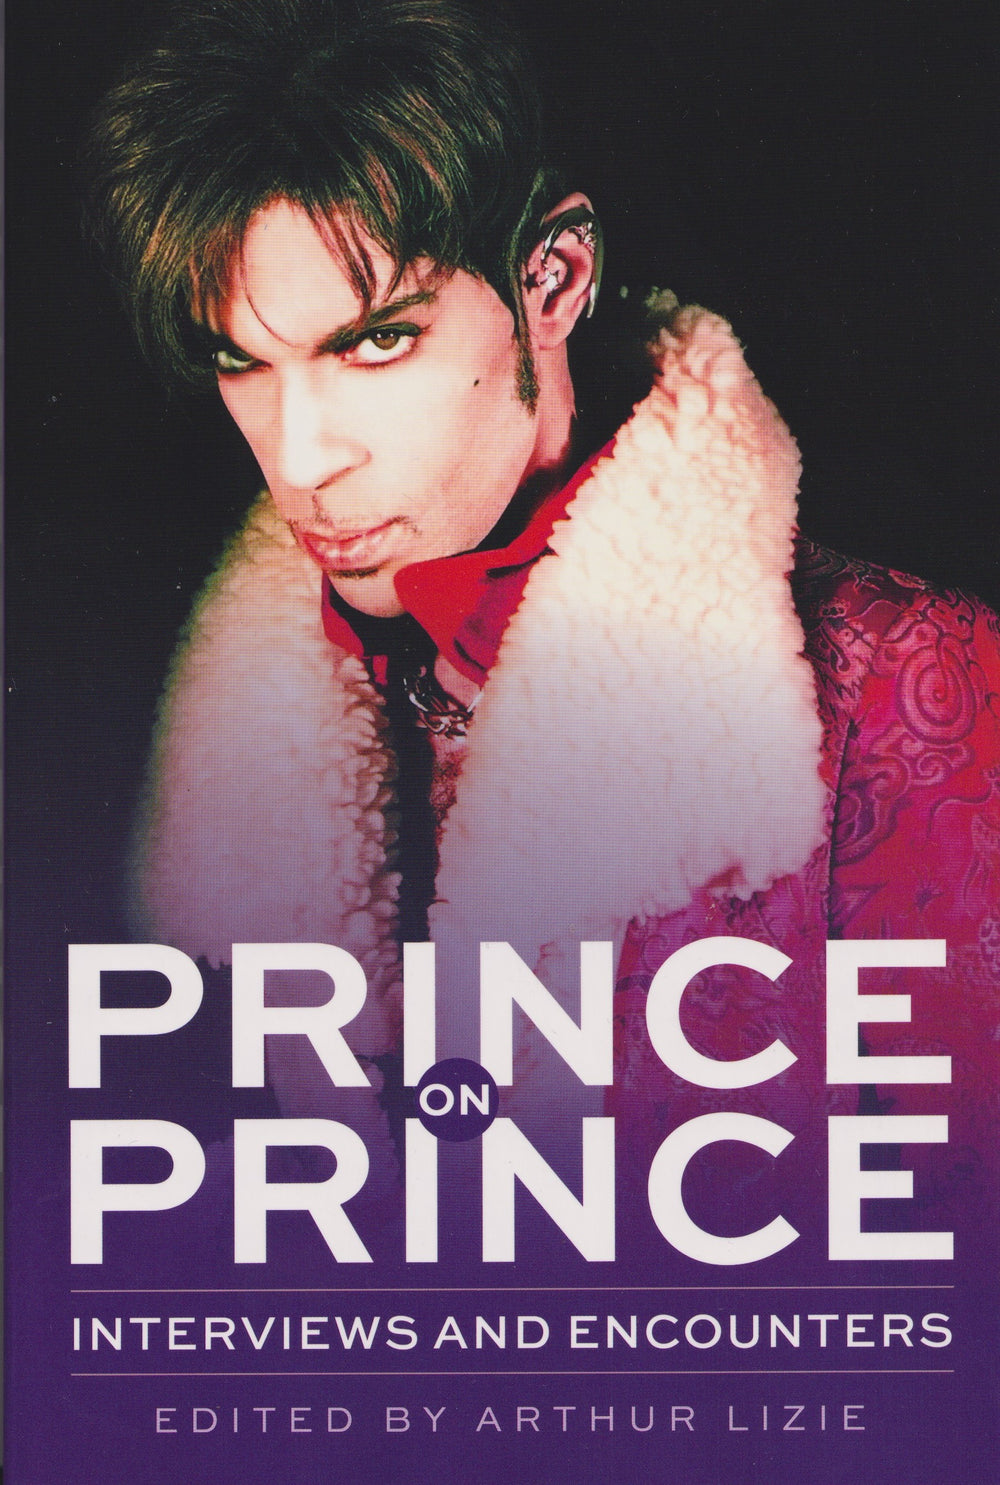 Prince On Prince Interviews & Encounters Softbacked Book NEW